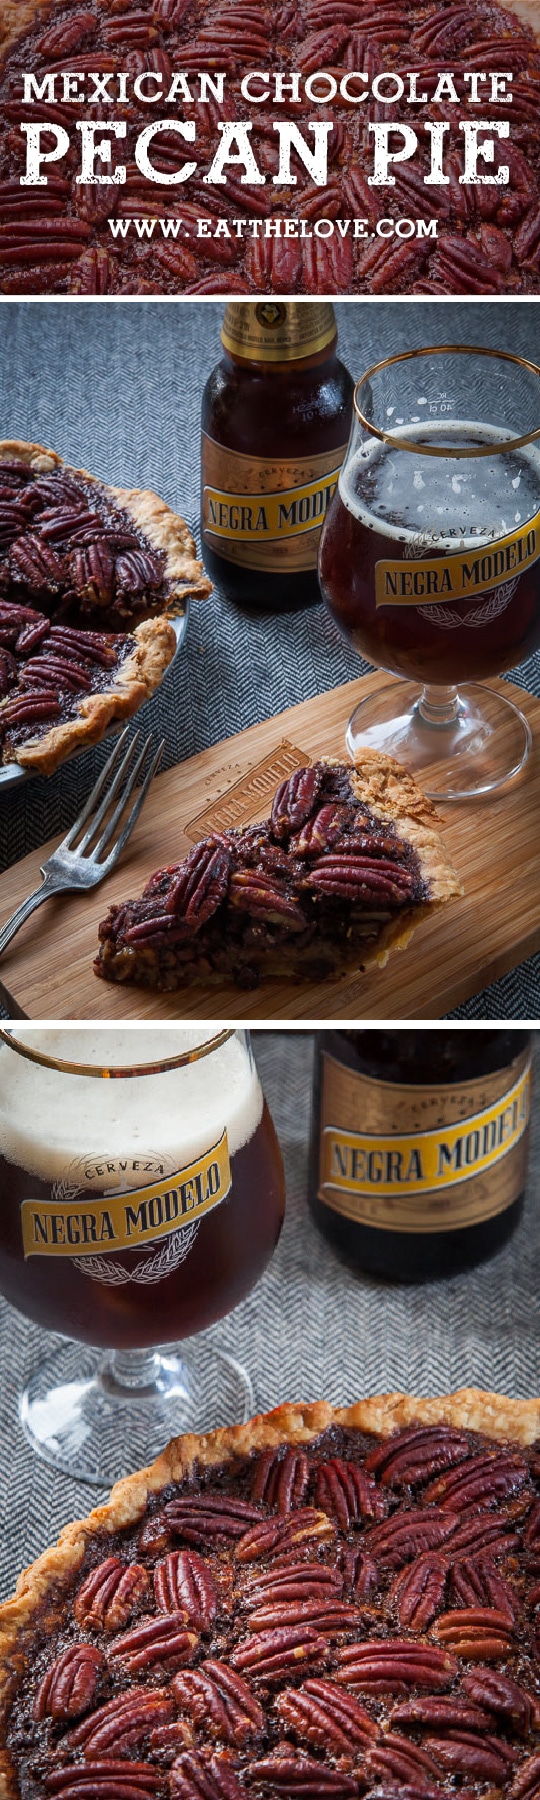 Mexican Chocolate Pecan Pie Recipe. Photo and recipe by Irvin Lin of Eat the Love.